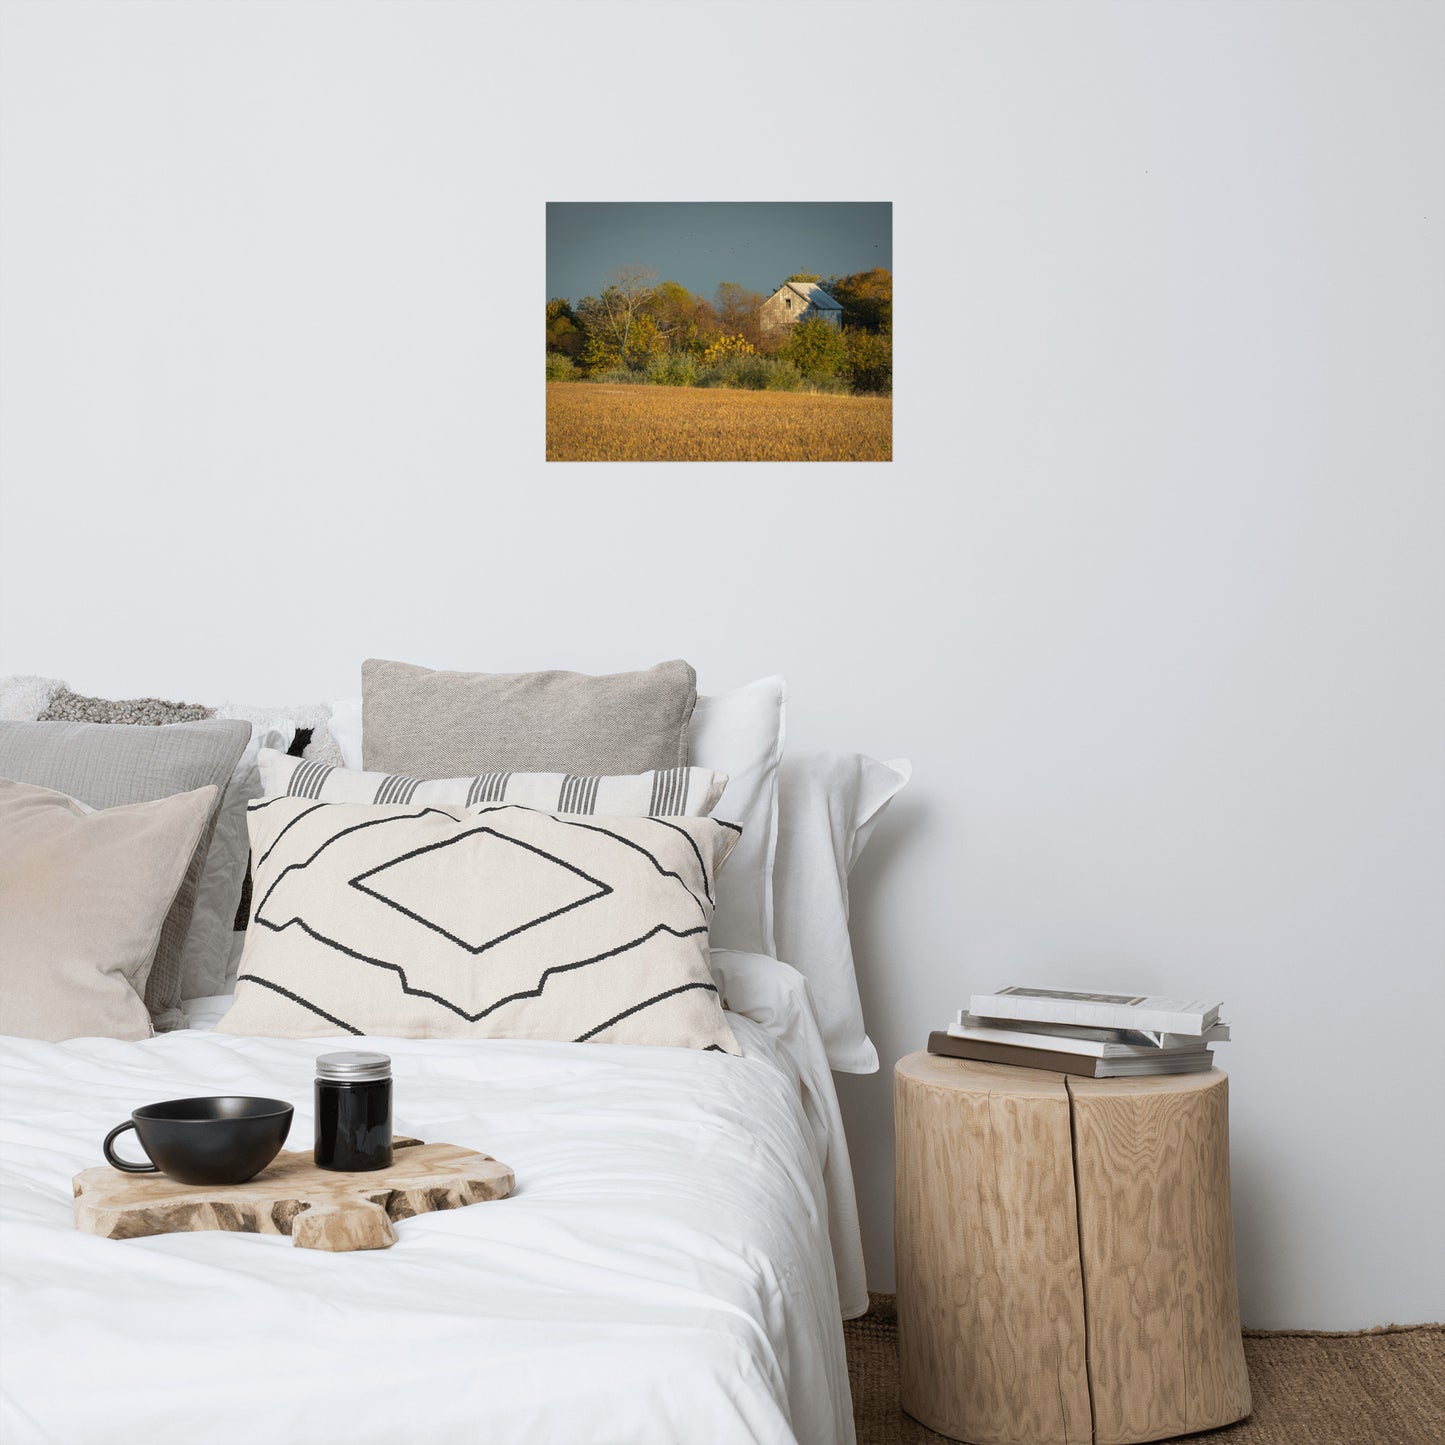 Country Style Wall Pictures: Abandoned Barn In The Trees Landscape Photo Loose Wall Art Prints